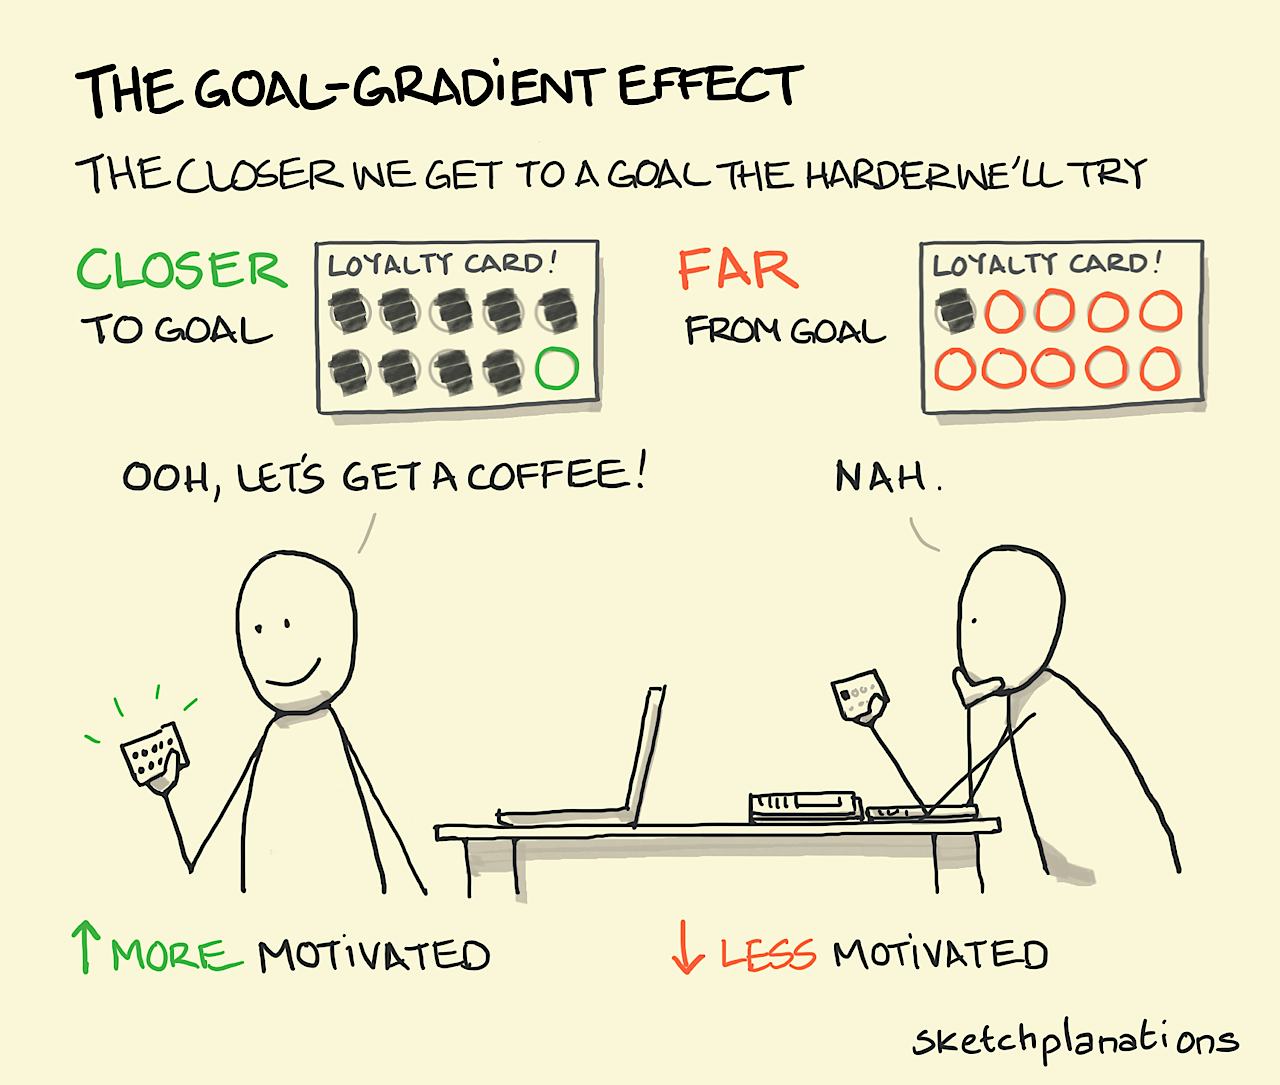 The goal-gradient effect - Sketchplanations